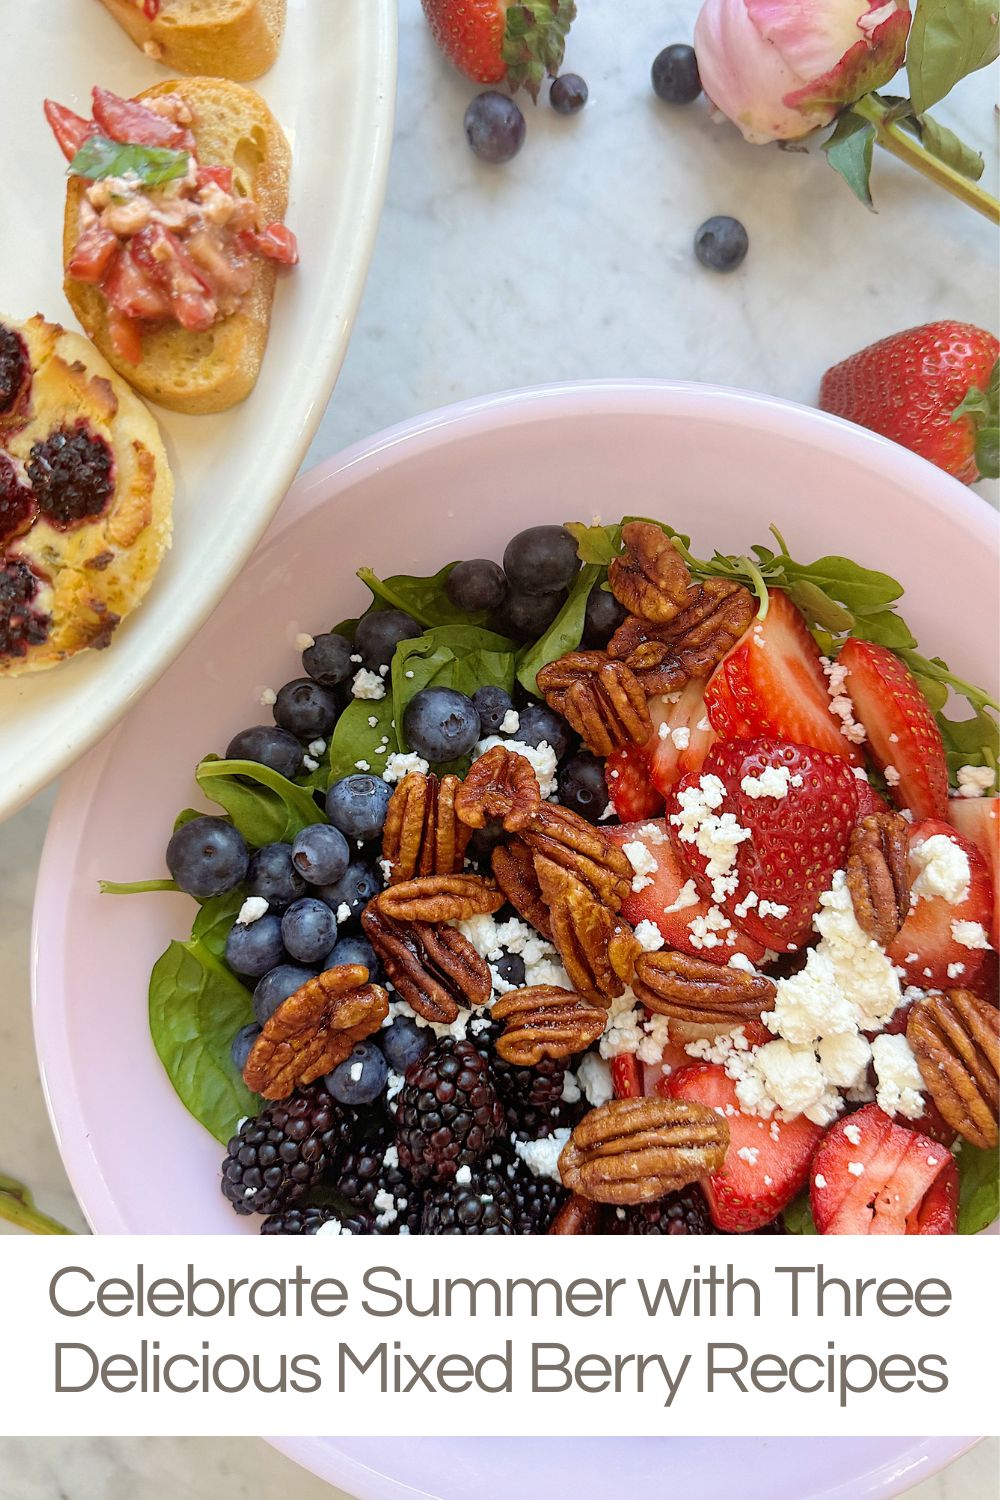 Summer is the perfect time to enjoy the vibrant flavors of fresh berries. Here are three standout recipes highlighting the best of summer's mixed berry bounty.